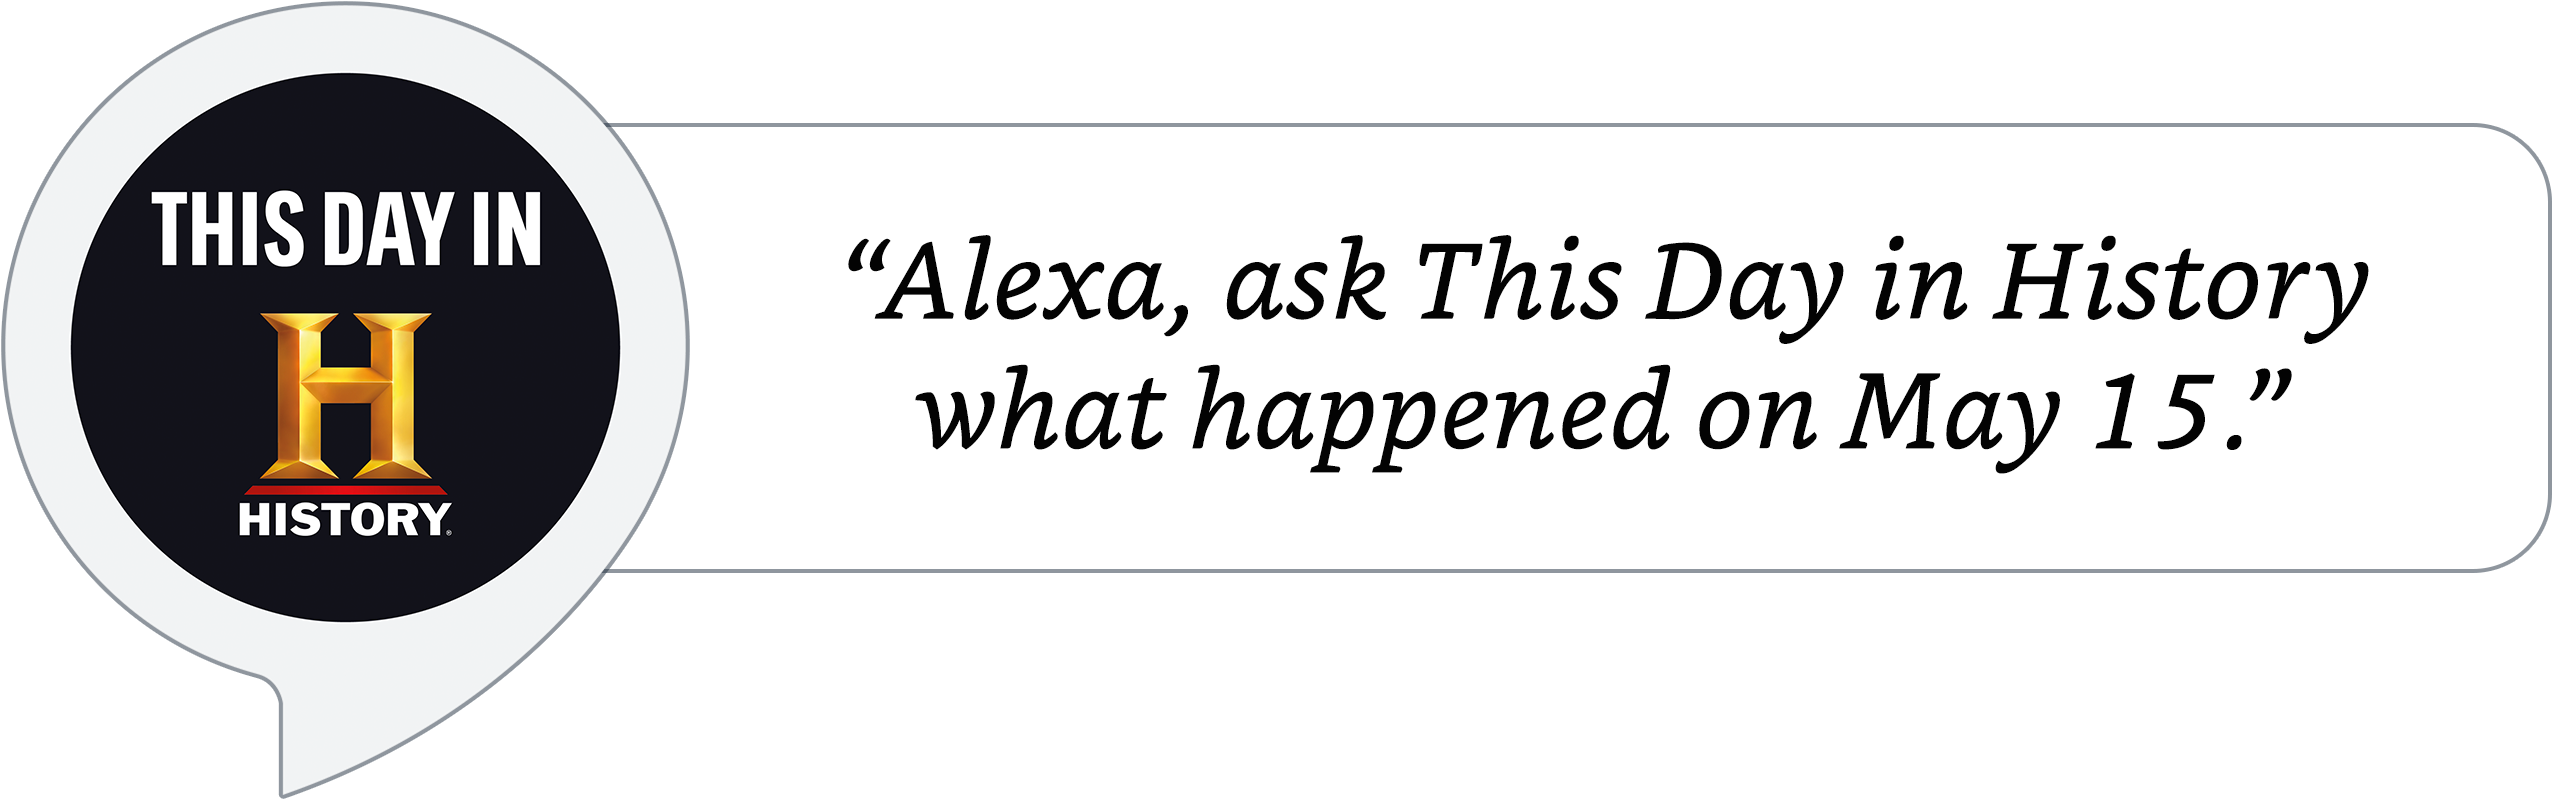 Alexa, ask This Day in History what happened on May 15.